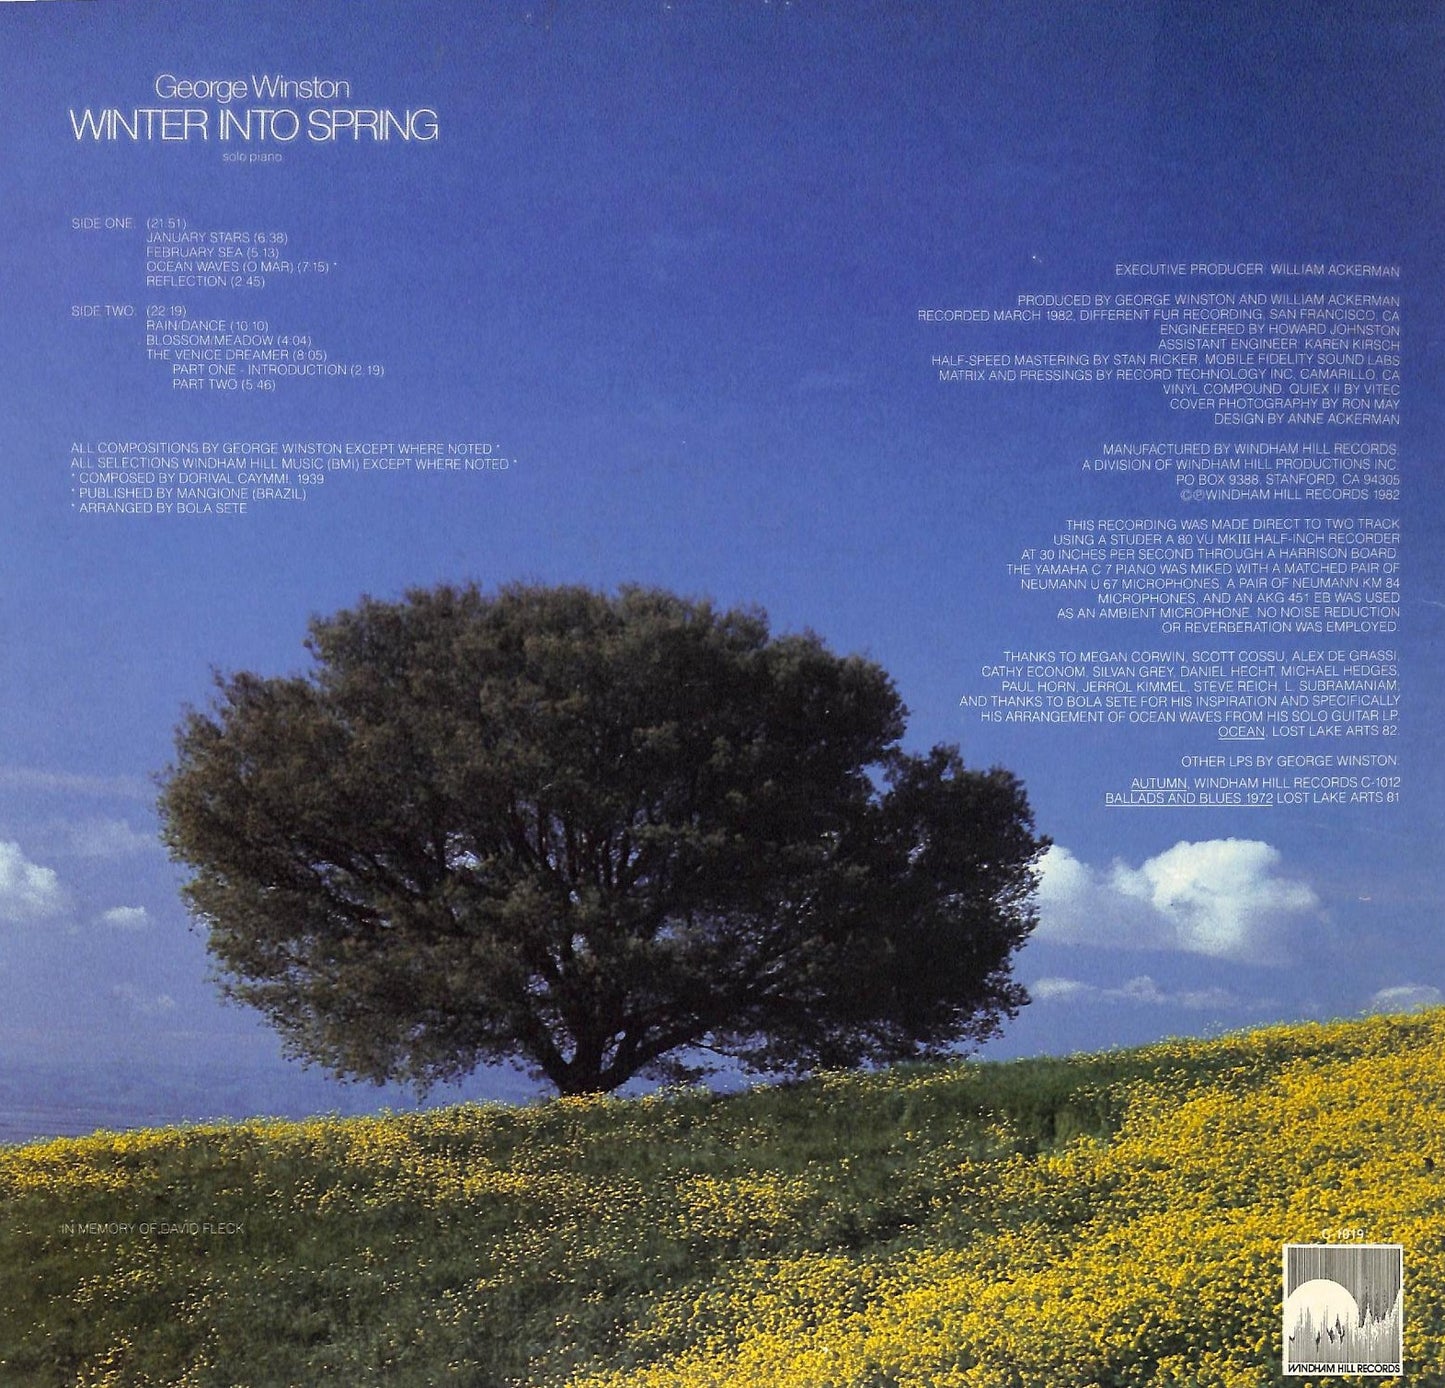 "Winter Into Spring" by George Winston is a New Age piano album renowned for its serene, minimalist compositions. Winston's use of silence and subtle melody to paint aural landscapes of the changing seasons. 